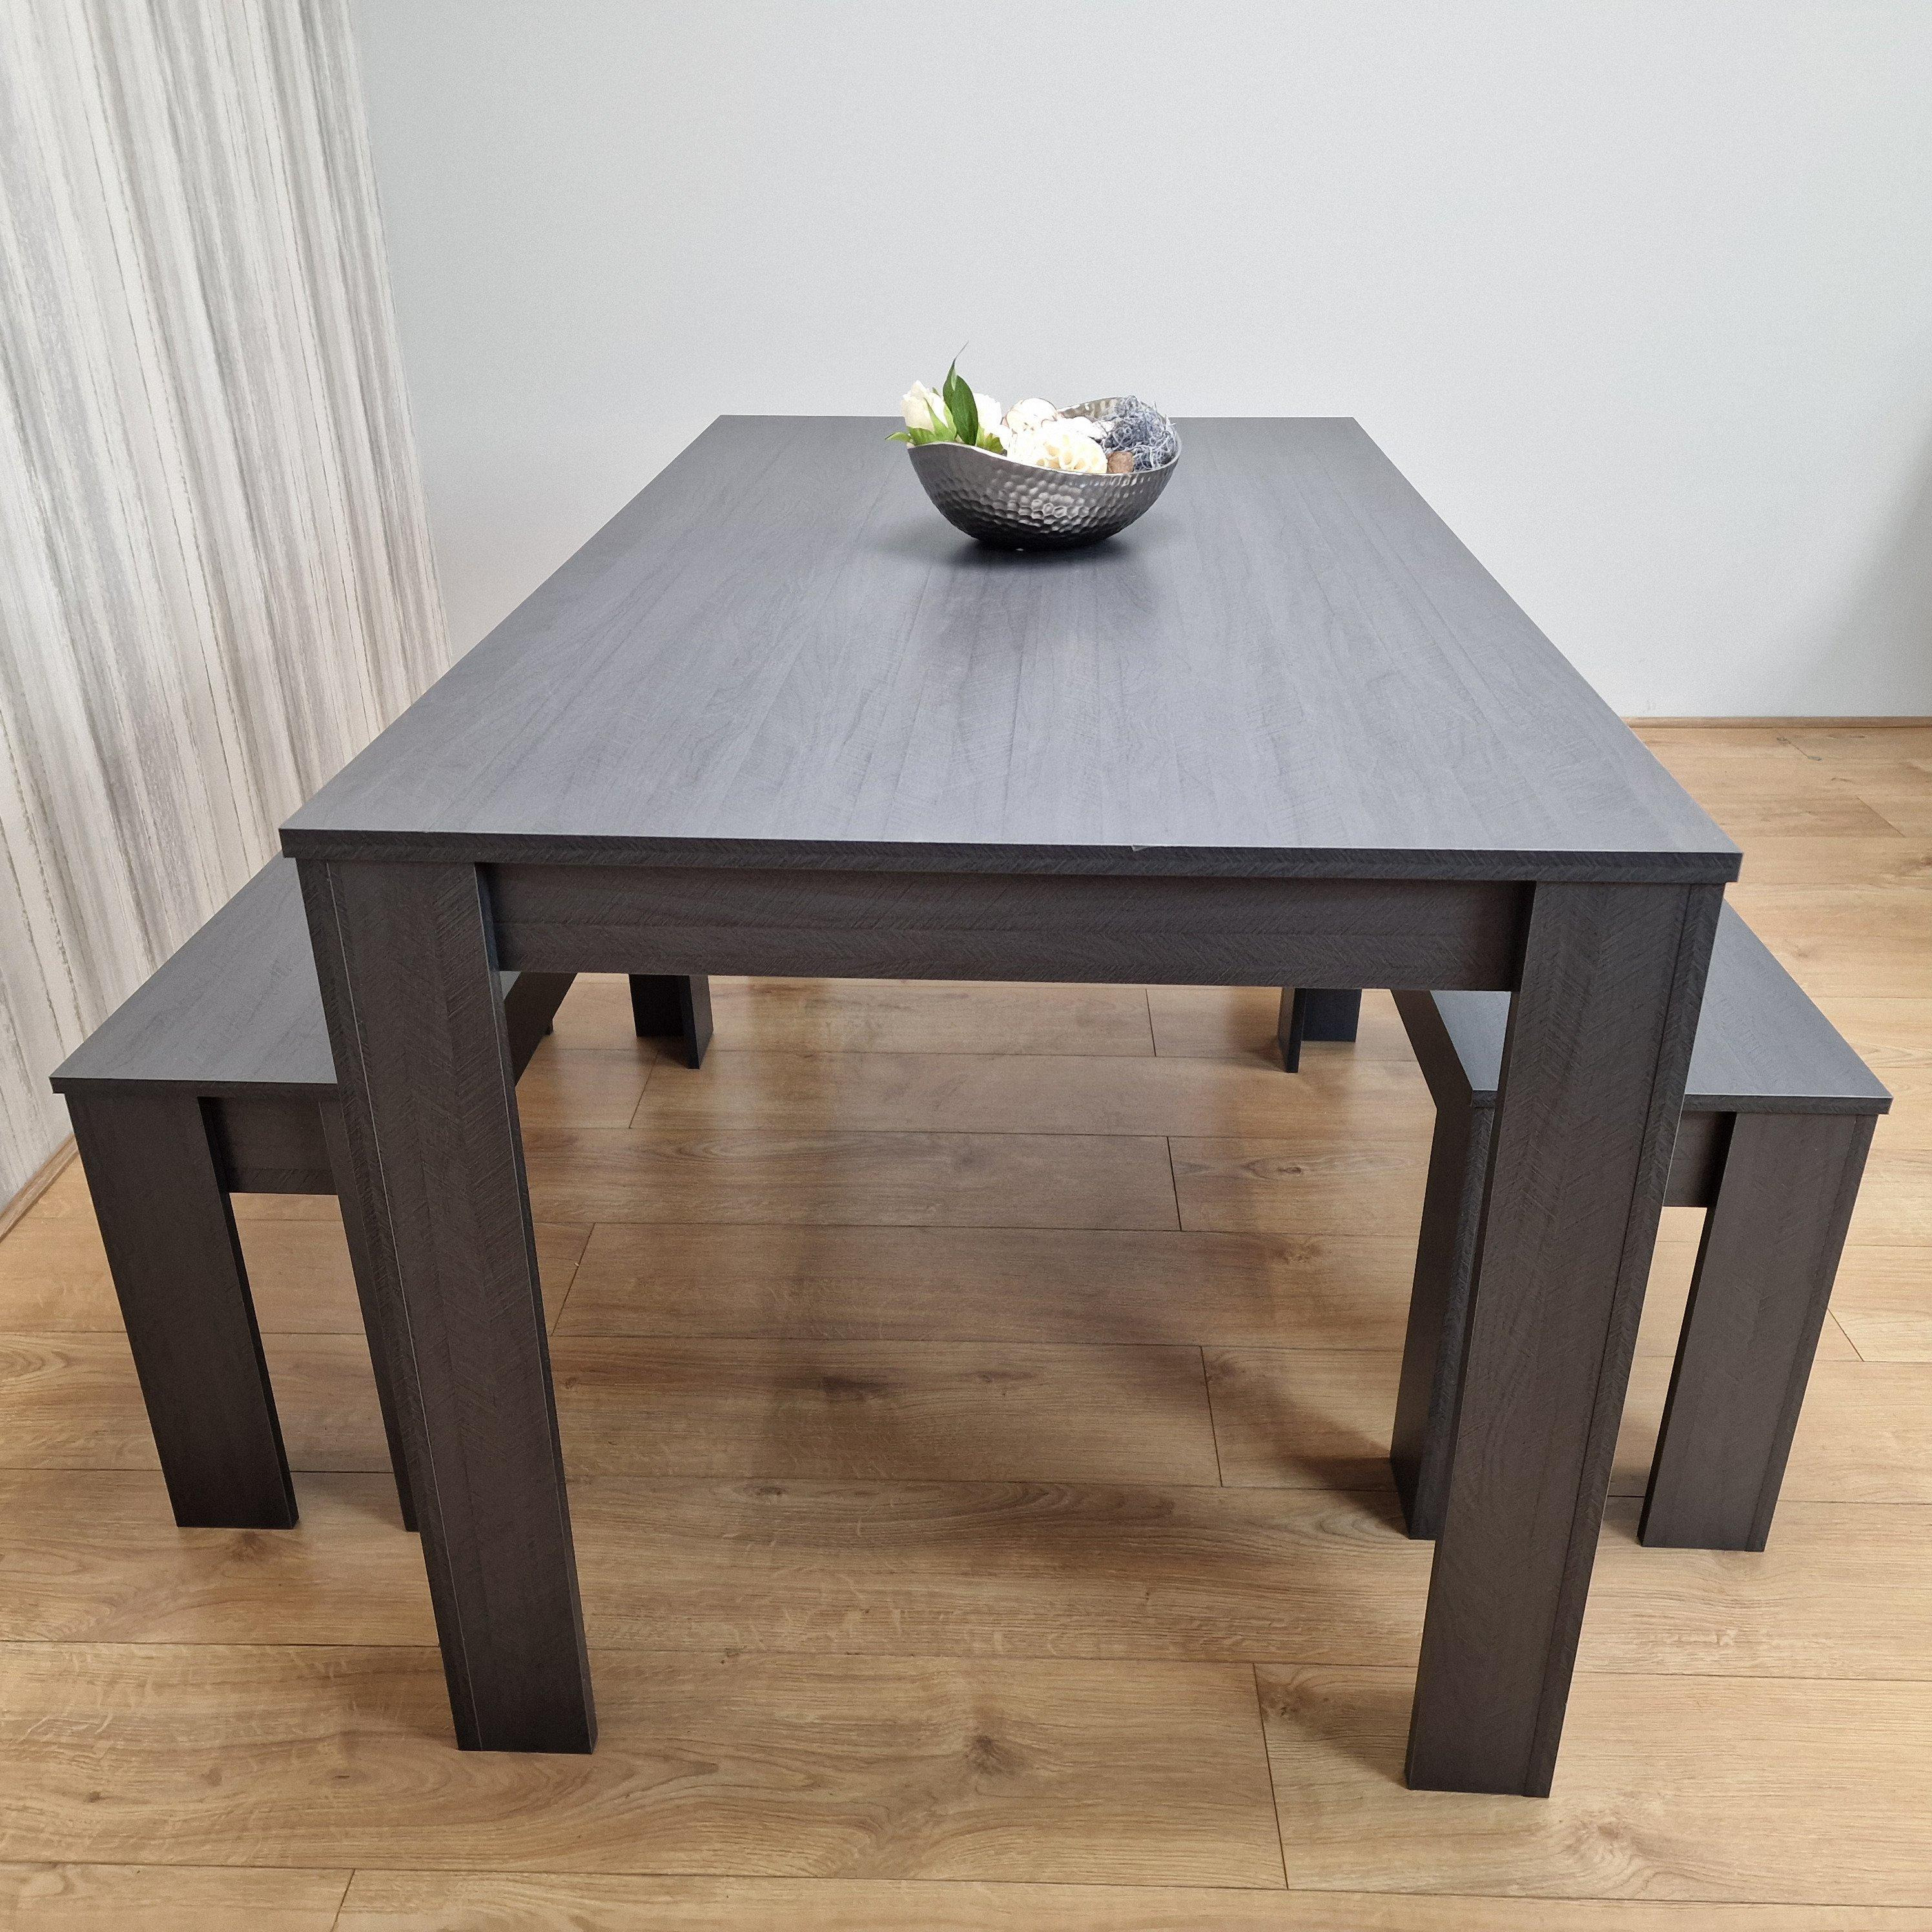 Dining Table Set Grey Dining Table With 2 Benches Kitchen Dining Table Set Dining Room Table for Four - image 1